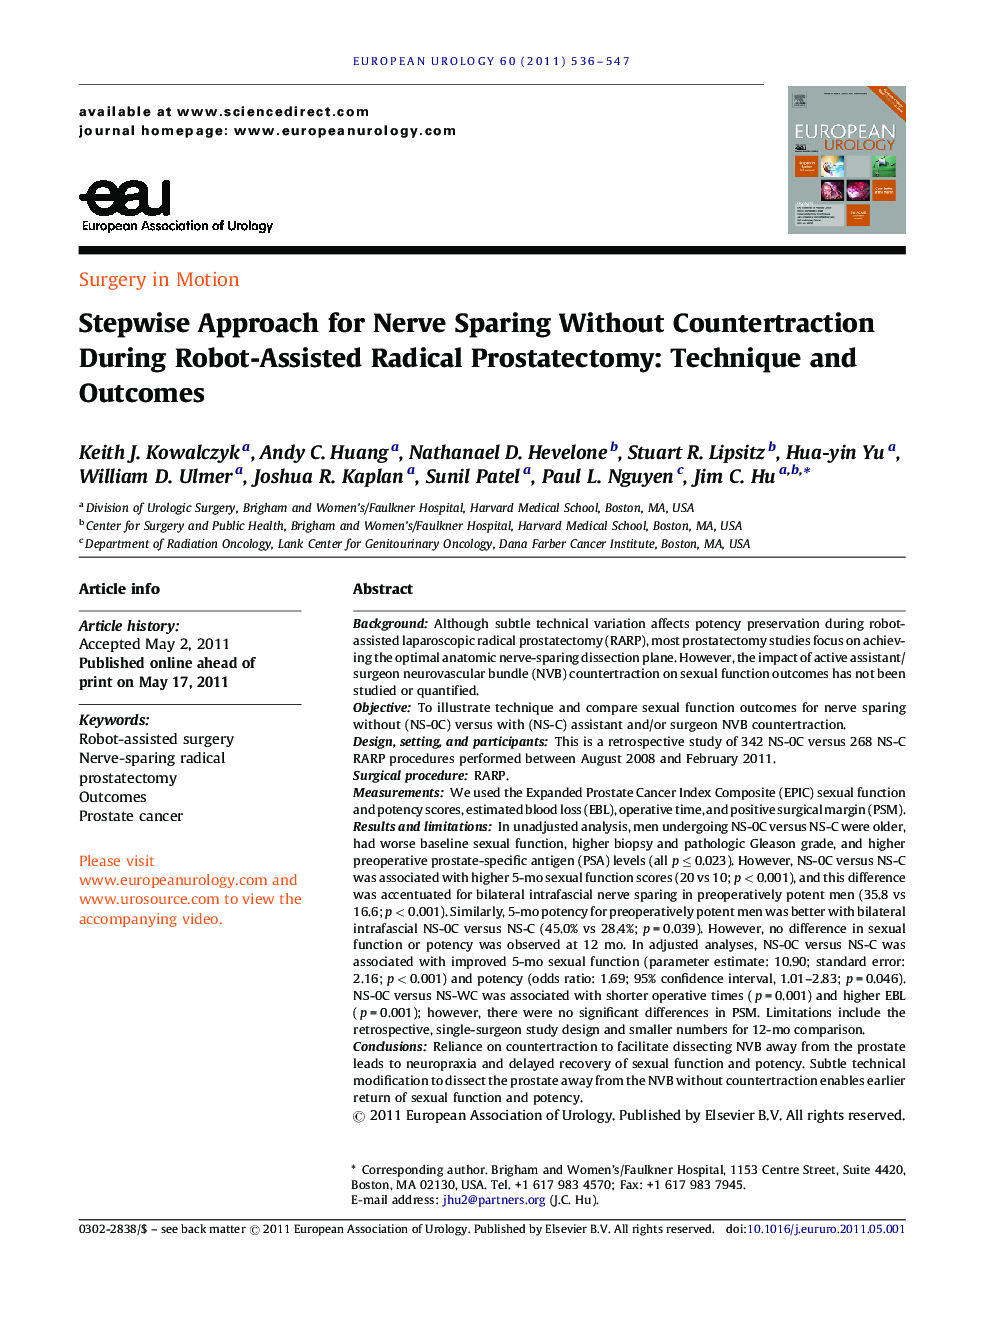 Stepwise Approach for Nerve Sparing Without Countertraction During Robot-Assisted Radical Prostatectomy: Technique and Outcomes